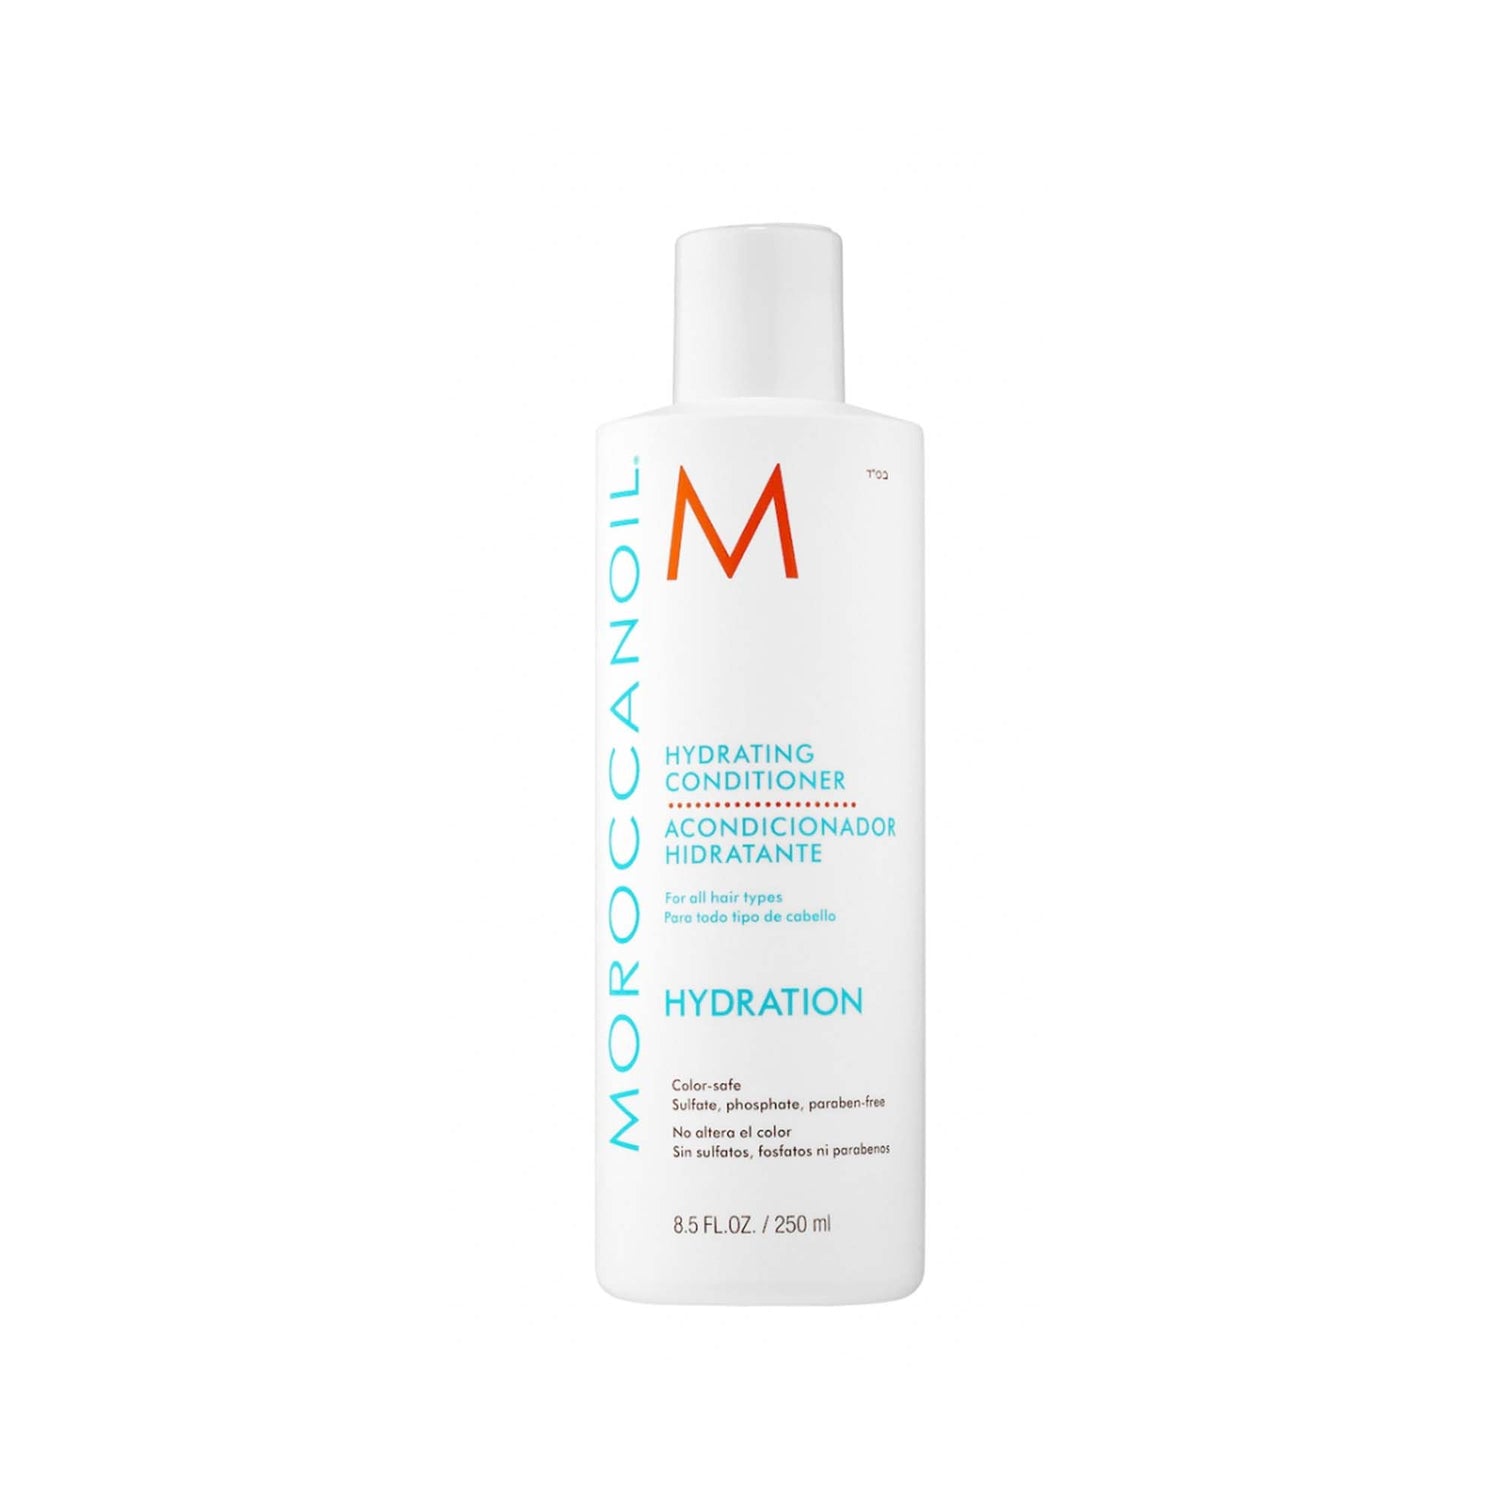 Morrocanoil Hydrating Conditioner